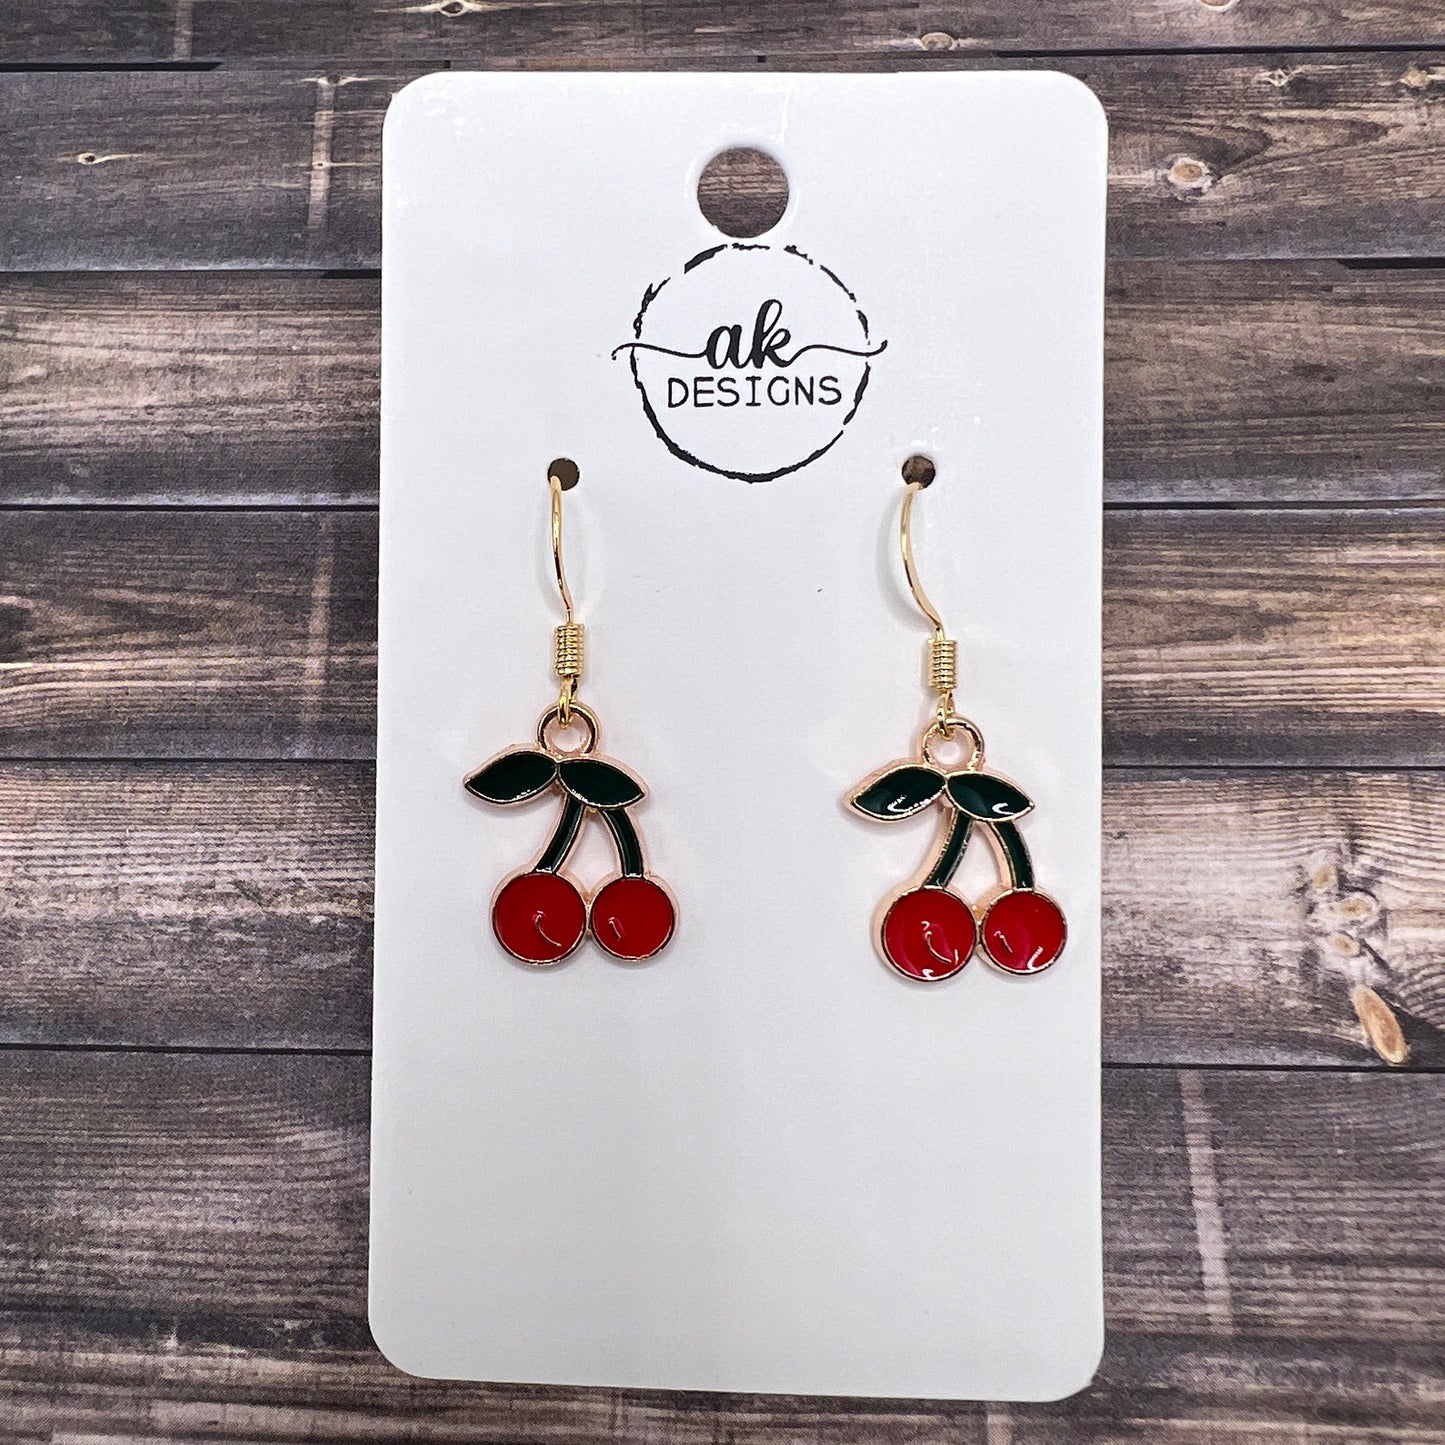 Red Cherries Cherry  Earrings Hypoallergenic Goldtone Fruit Food Jewelry - Clearance